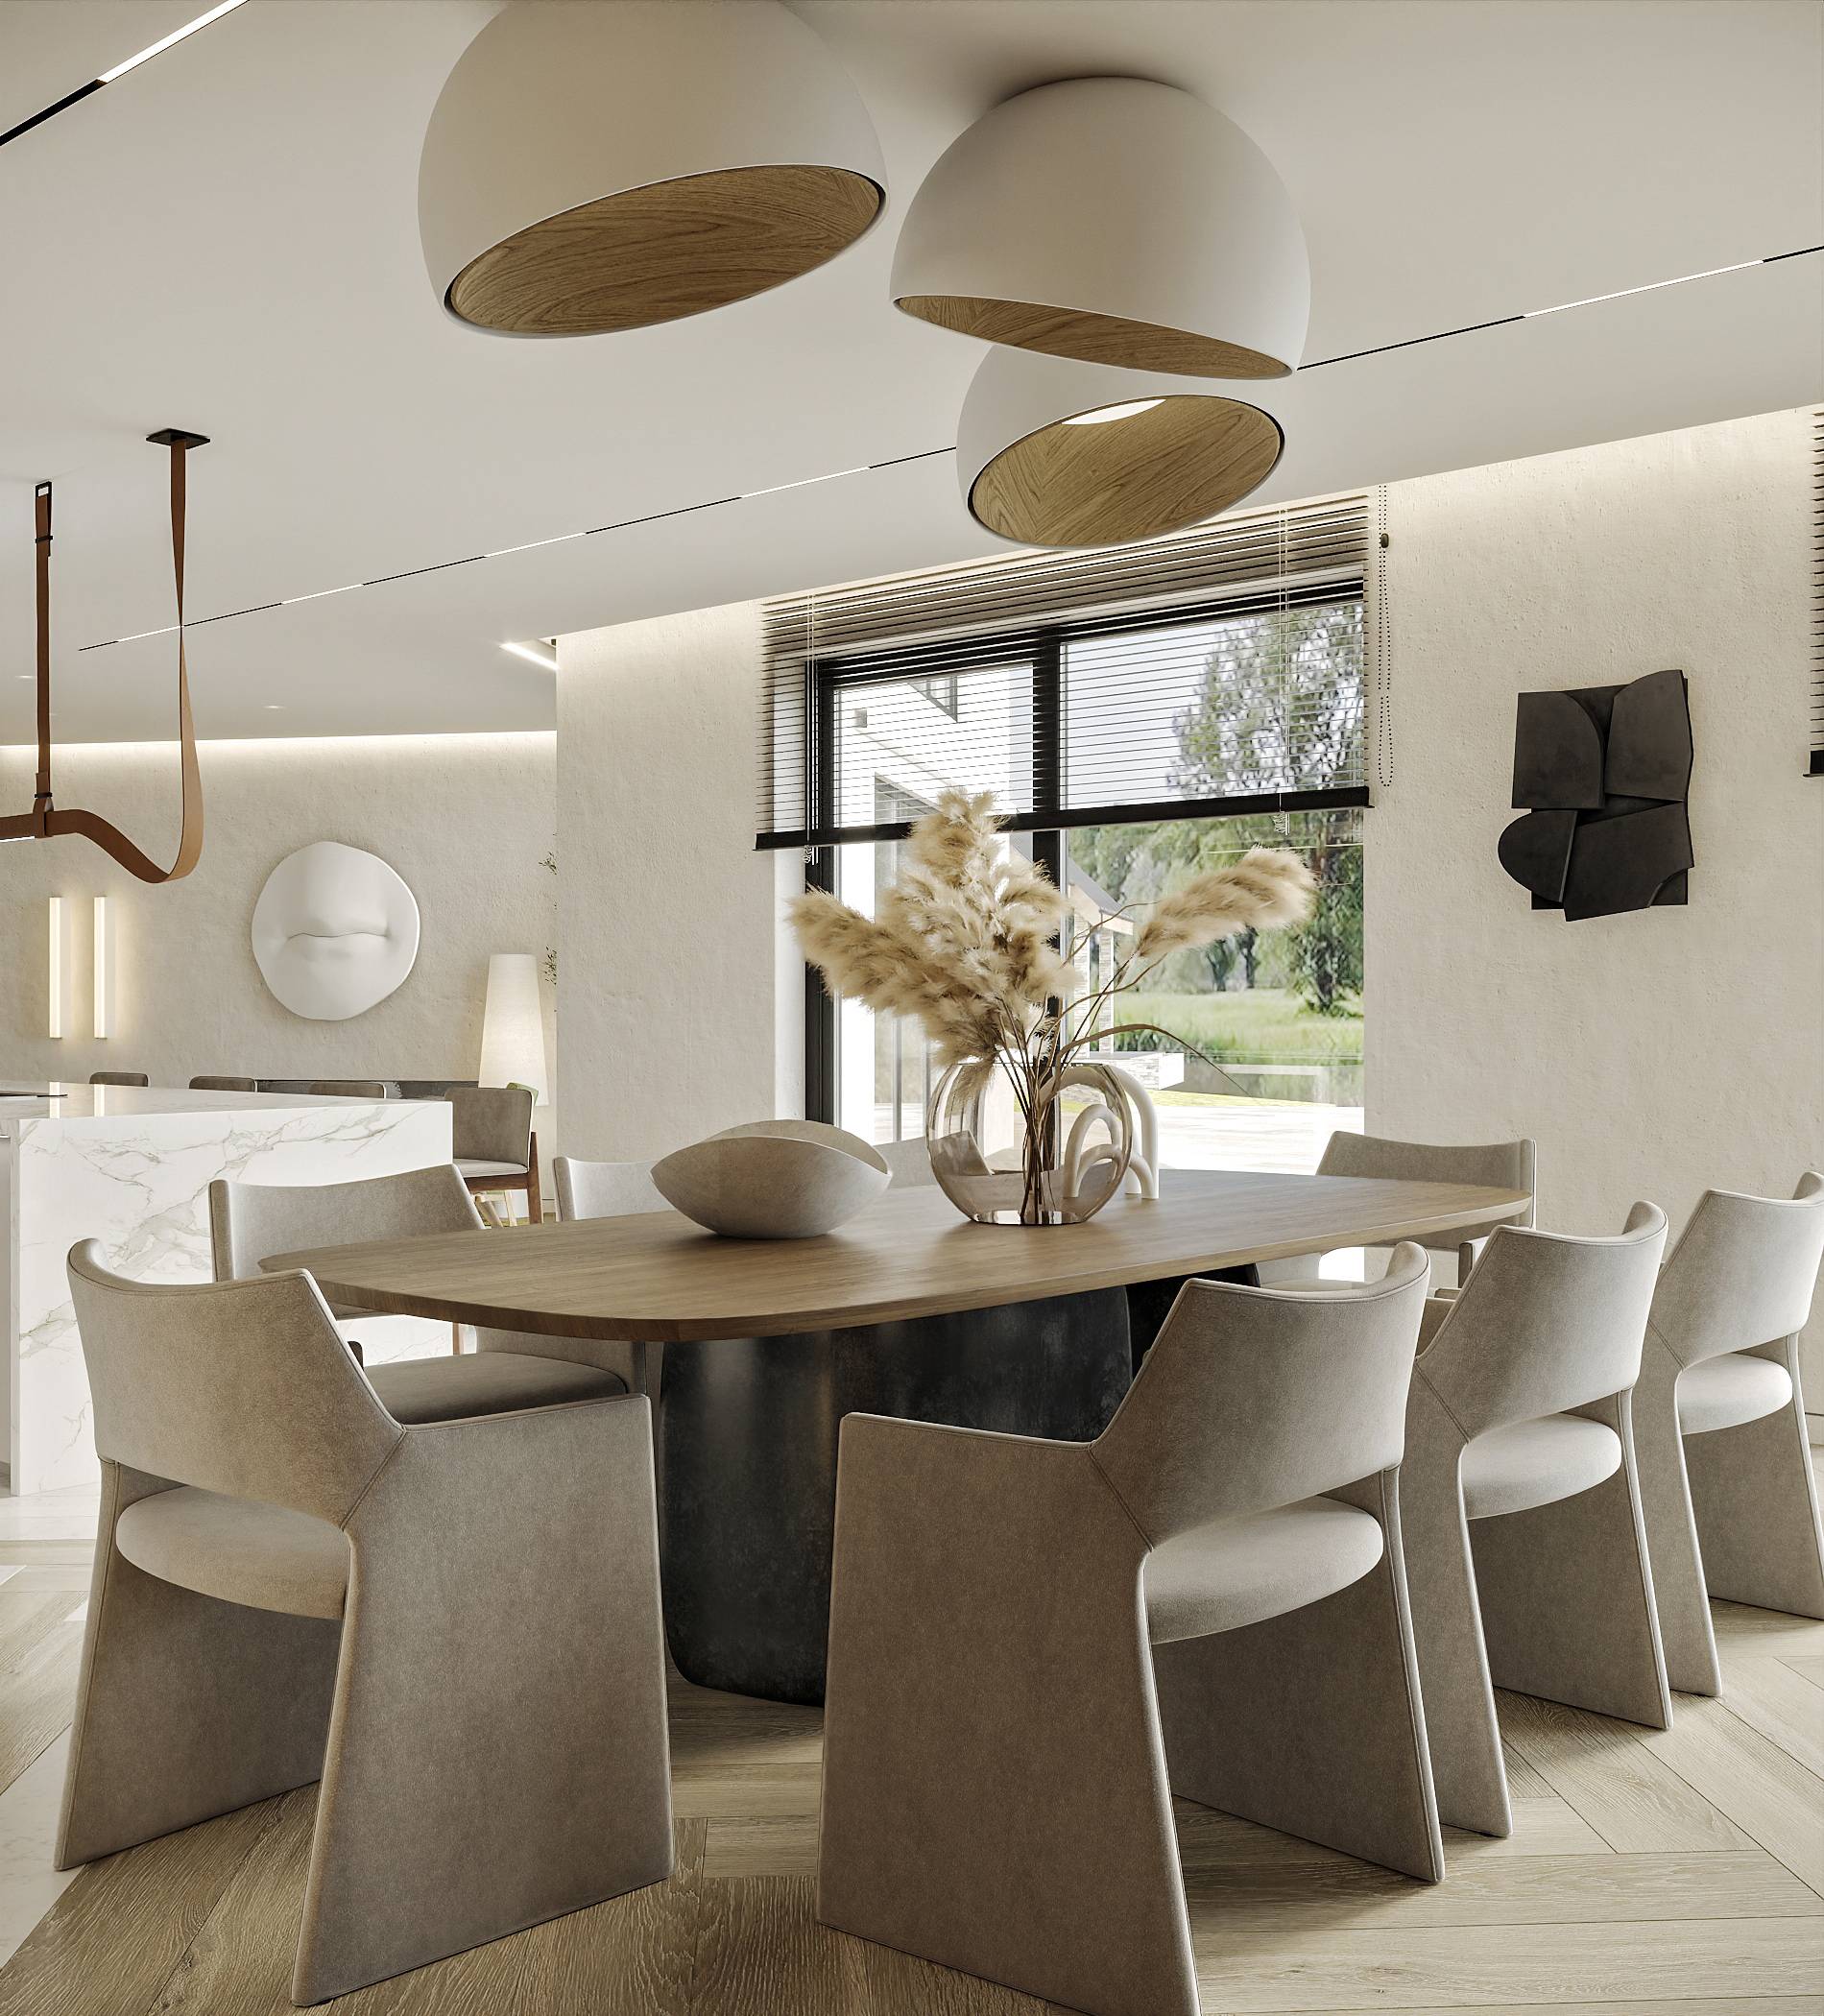 minimalist warm dining room with low geomtric chairs and dome lights